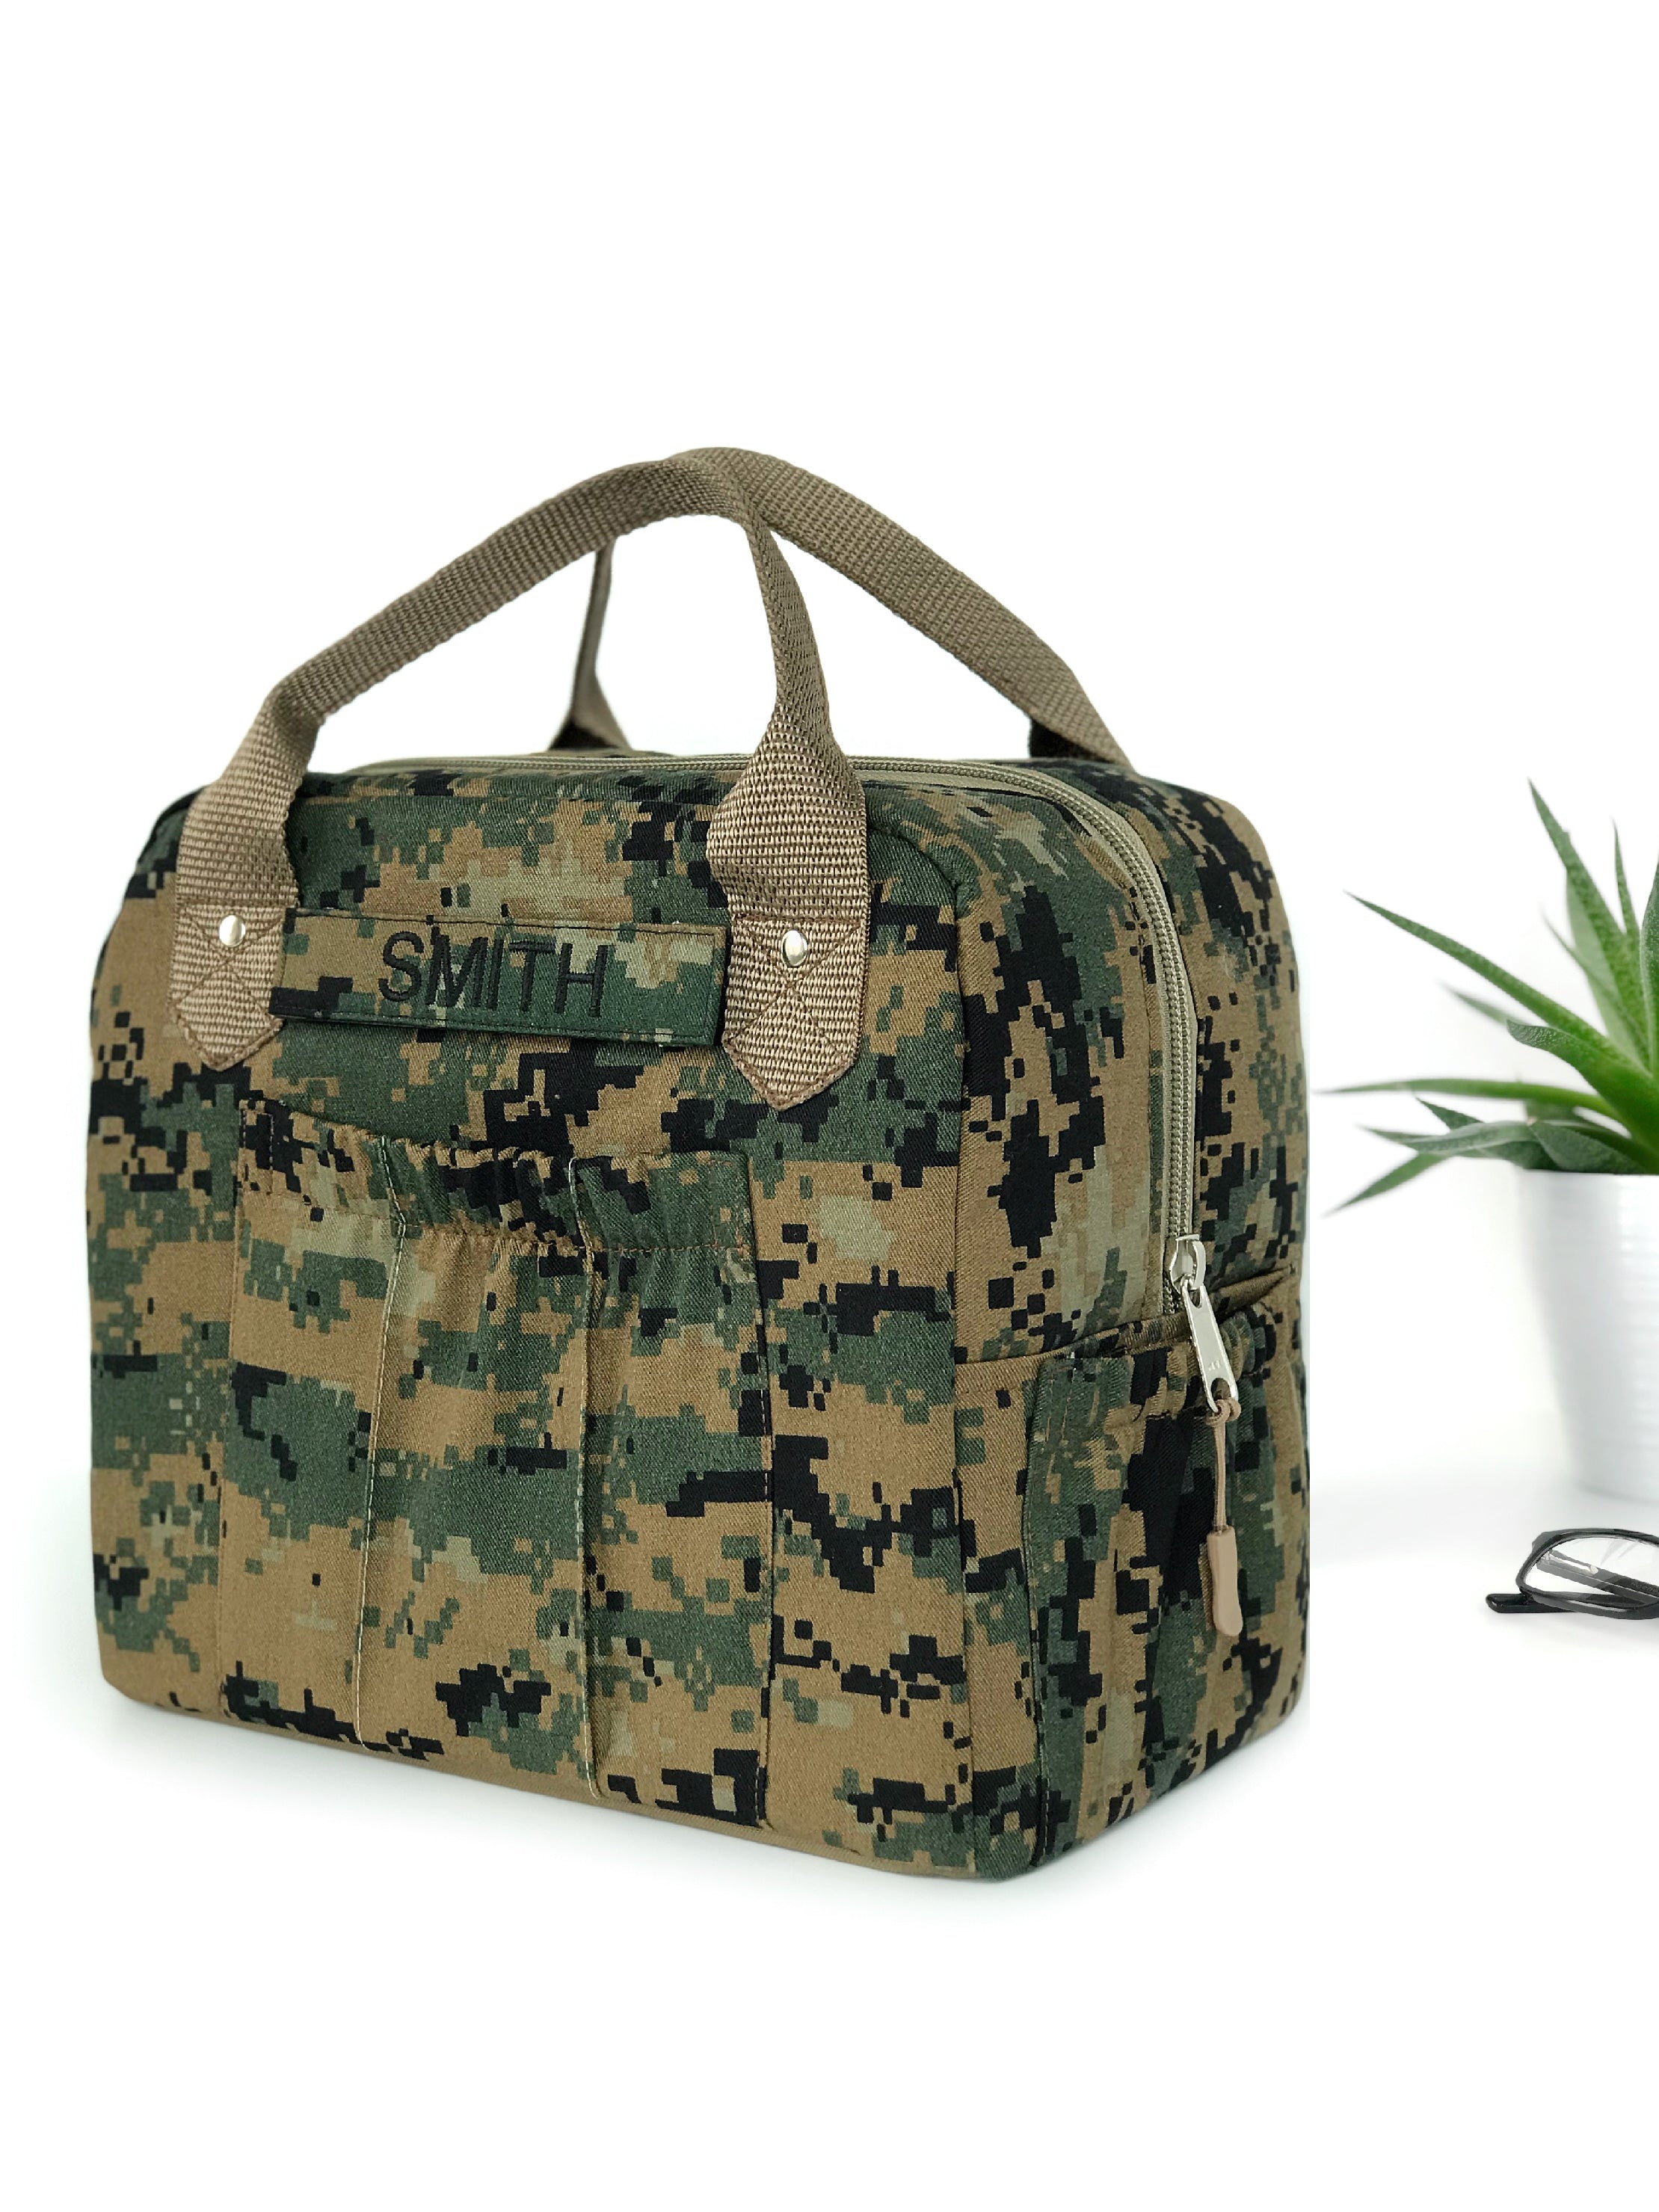 ⚡️Fit + Fresh Townsend Lunch Kit - Camo